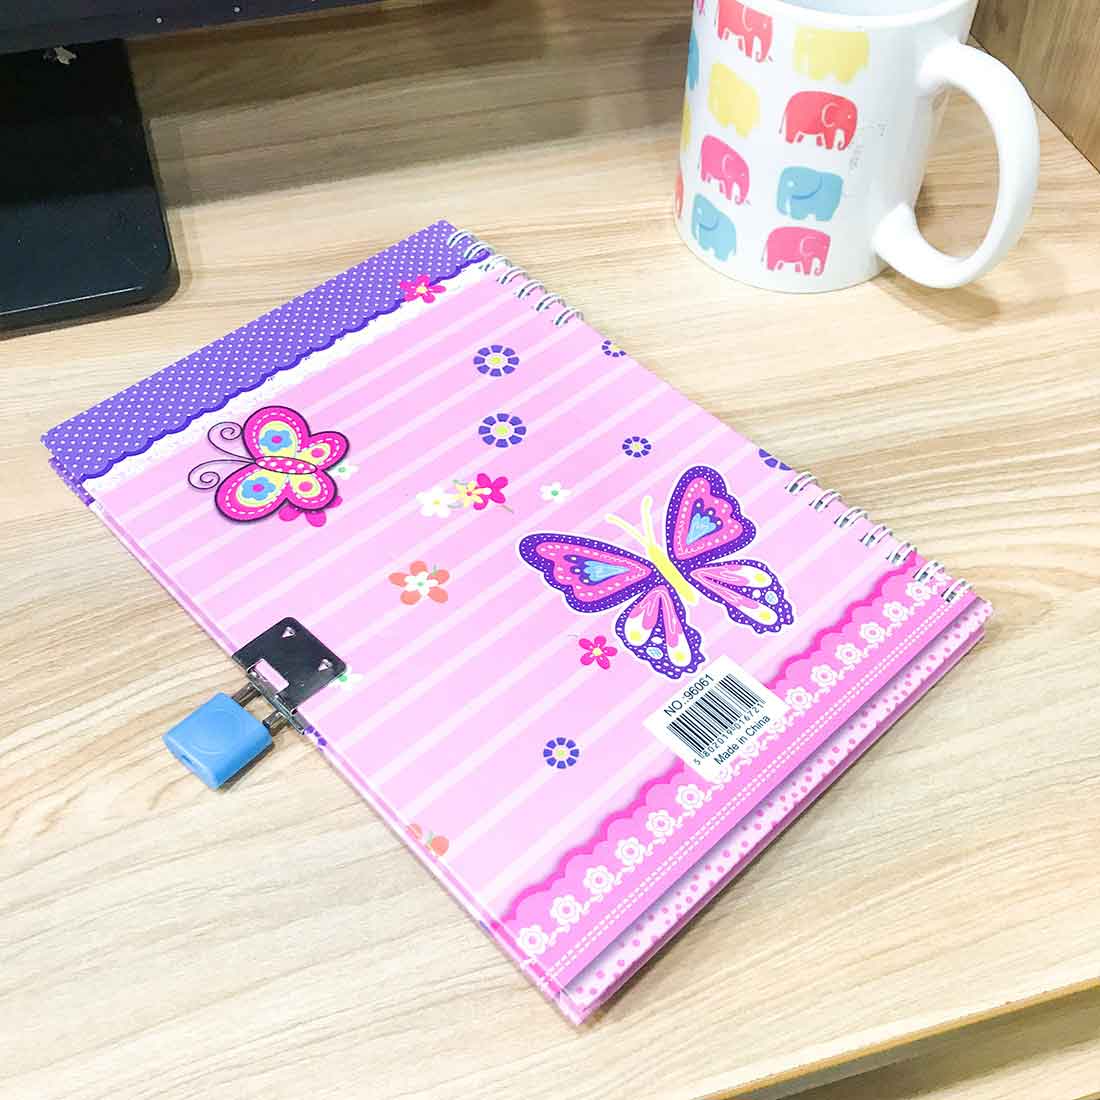 Notebook Diary With Lock - Pink Butterfly Design - for Kids, Children, School Student, Return Gifts - ApkaMart